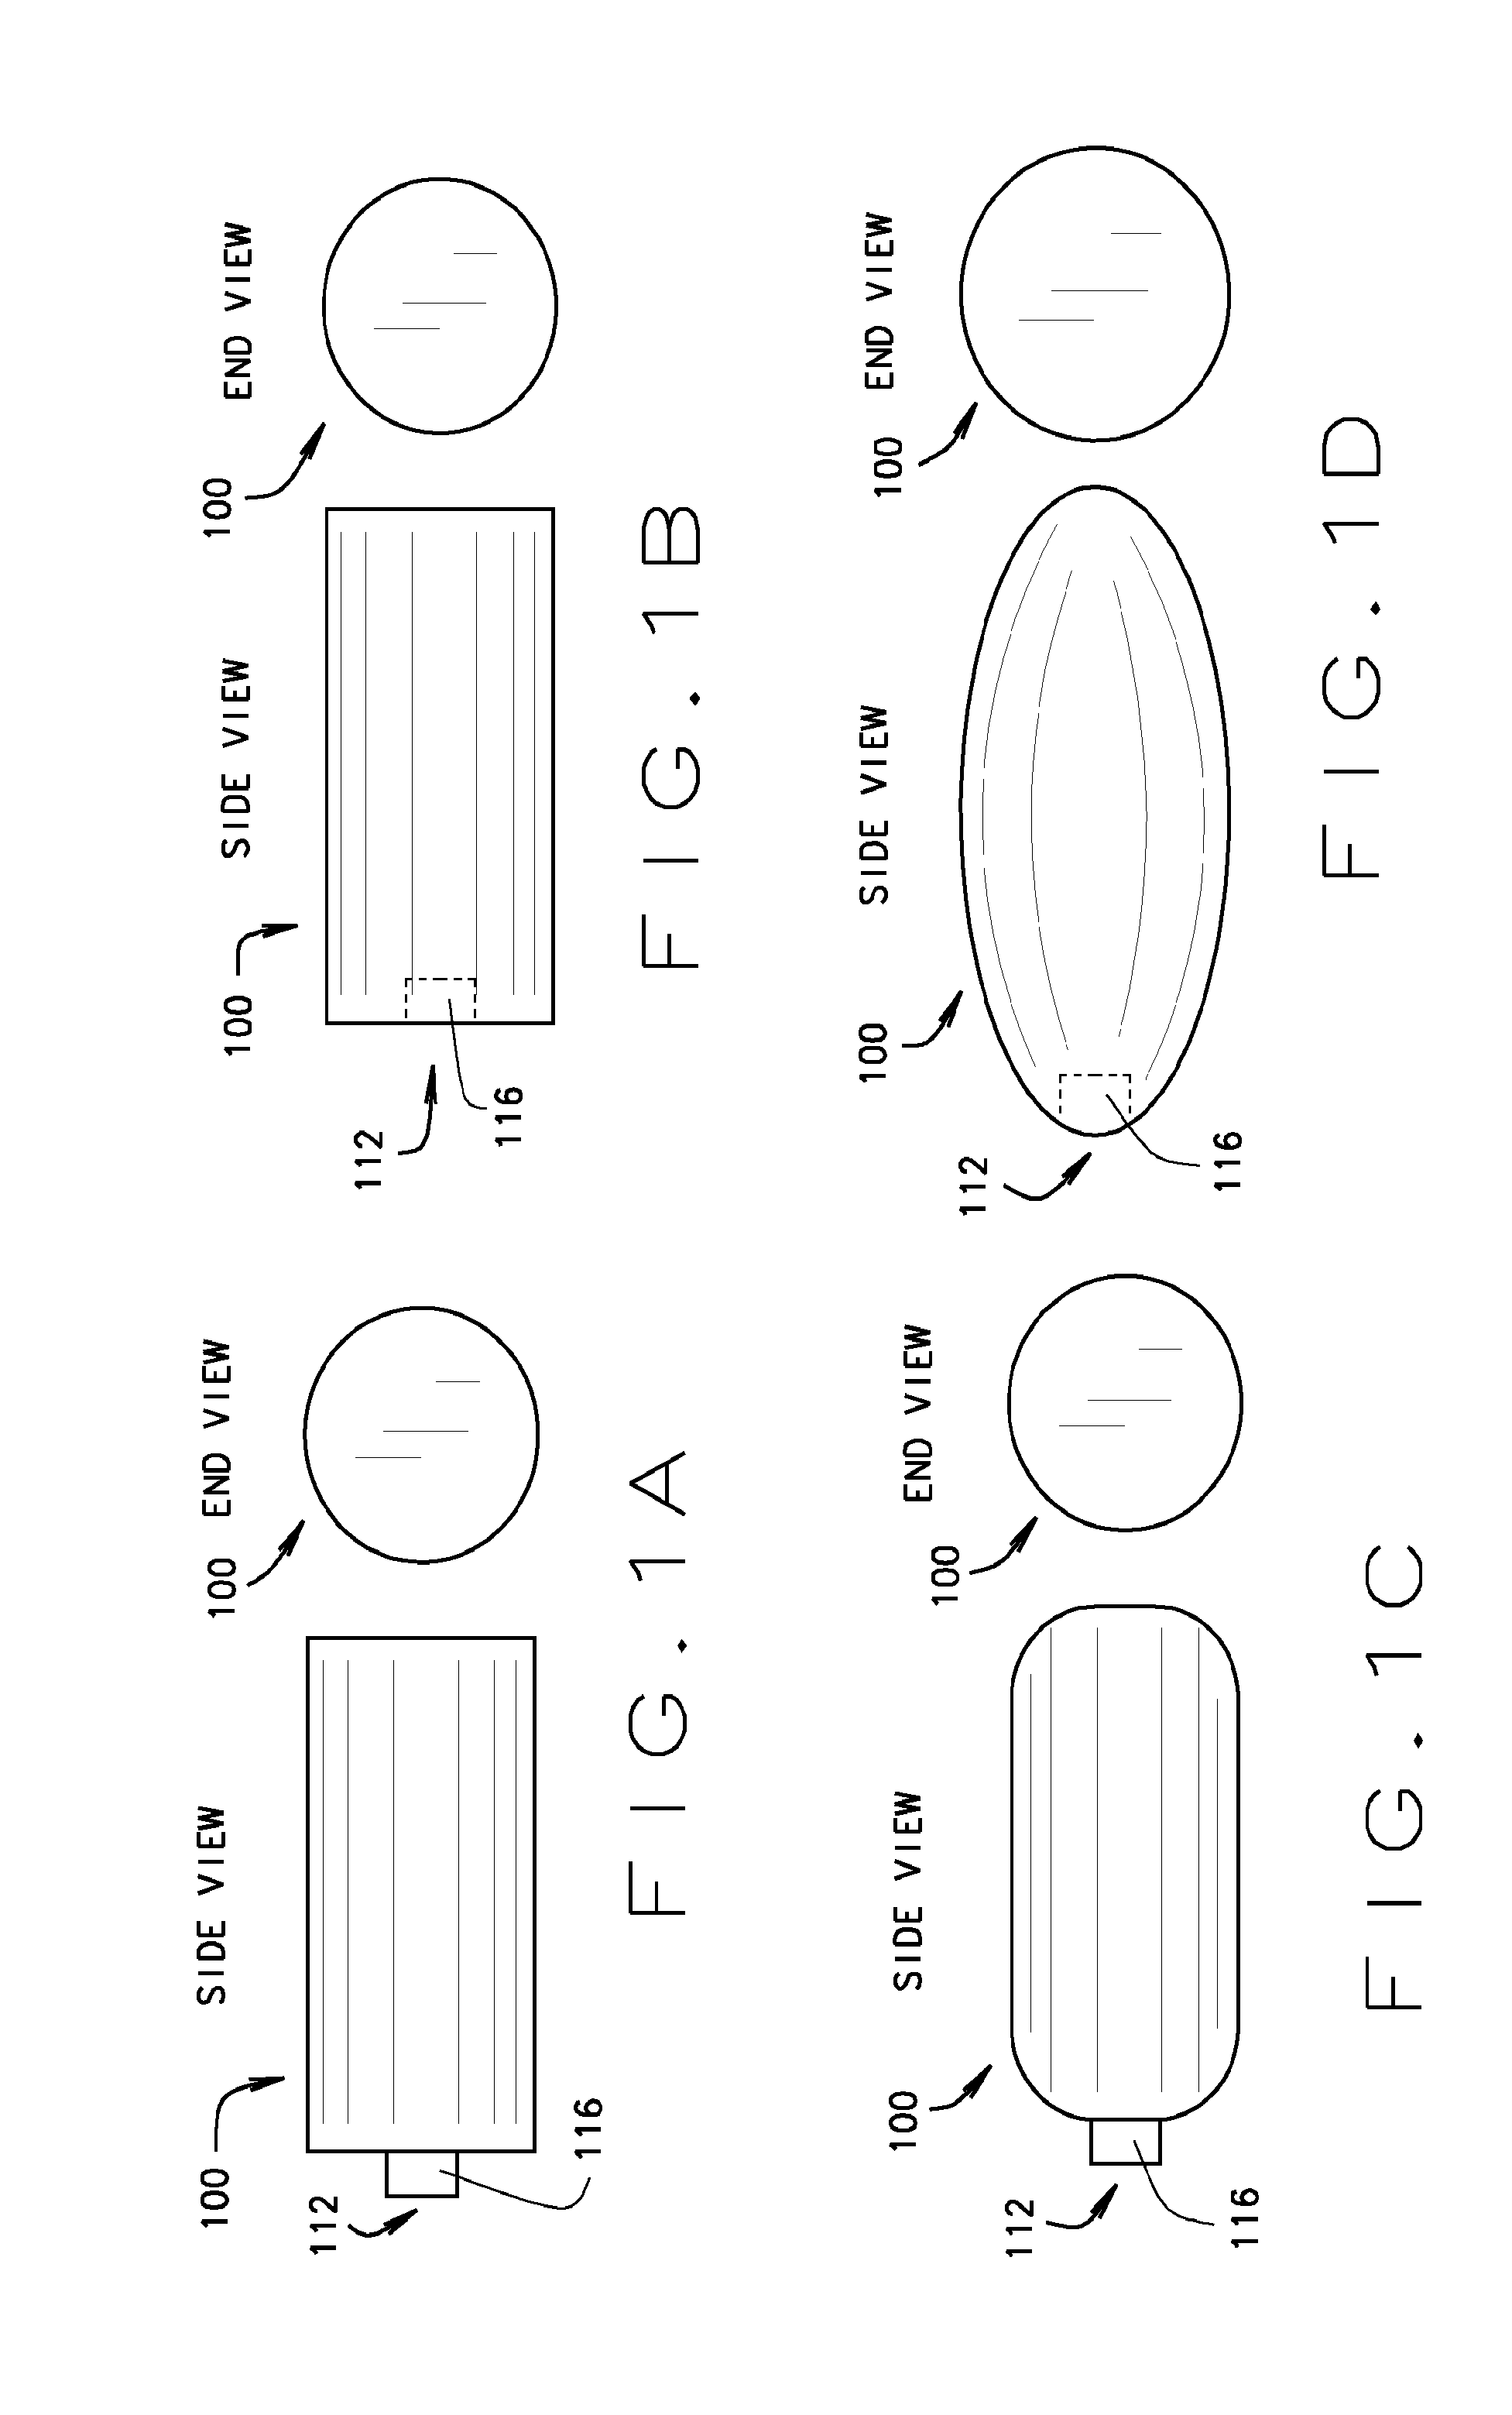 Blockstent device and methods of use